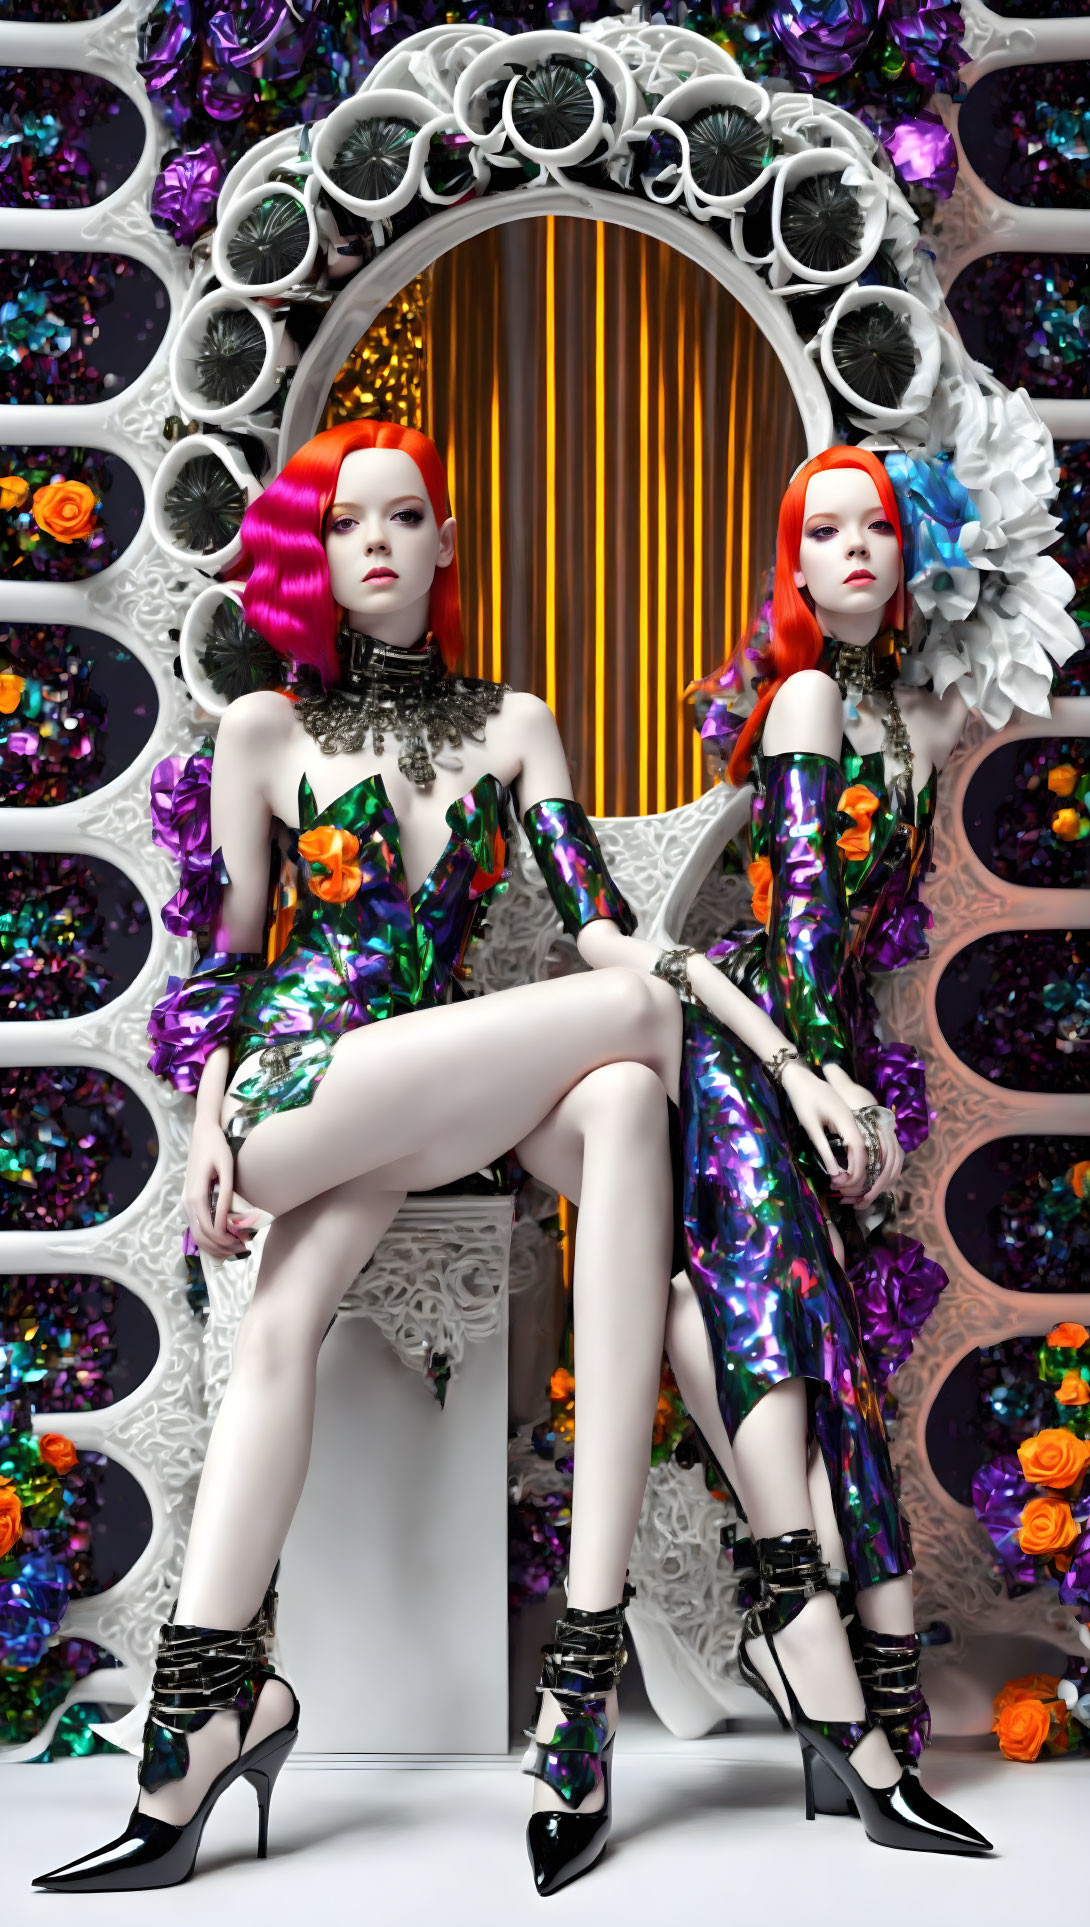 Symmetrical female figures with colorful hair and outfits by floral archway